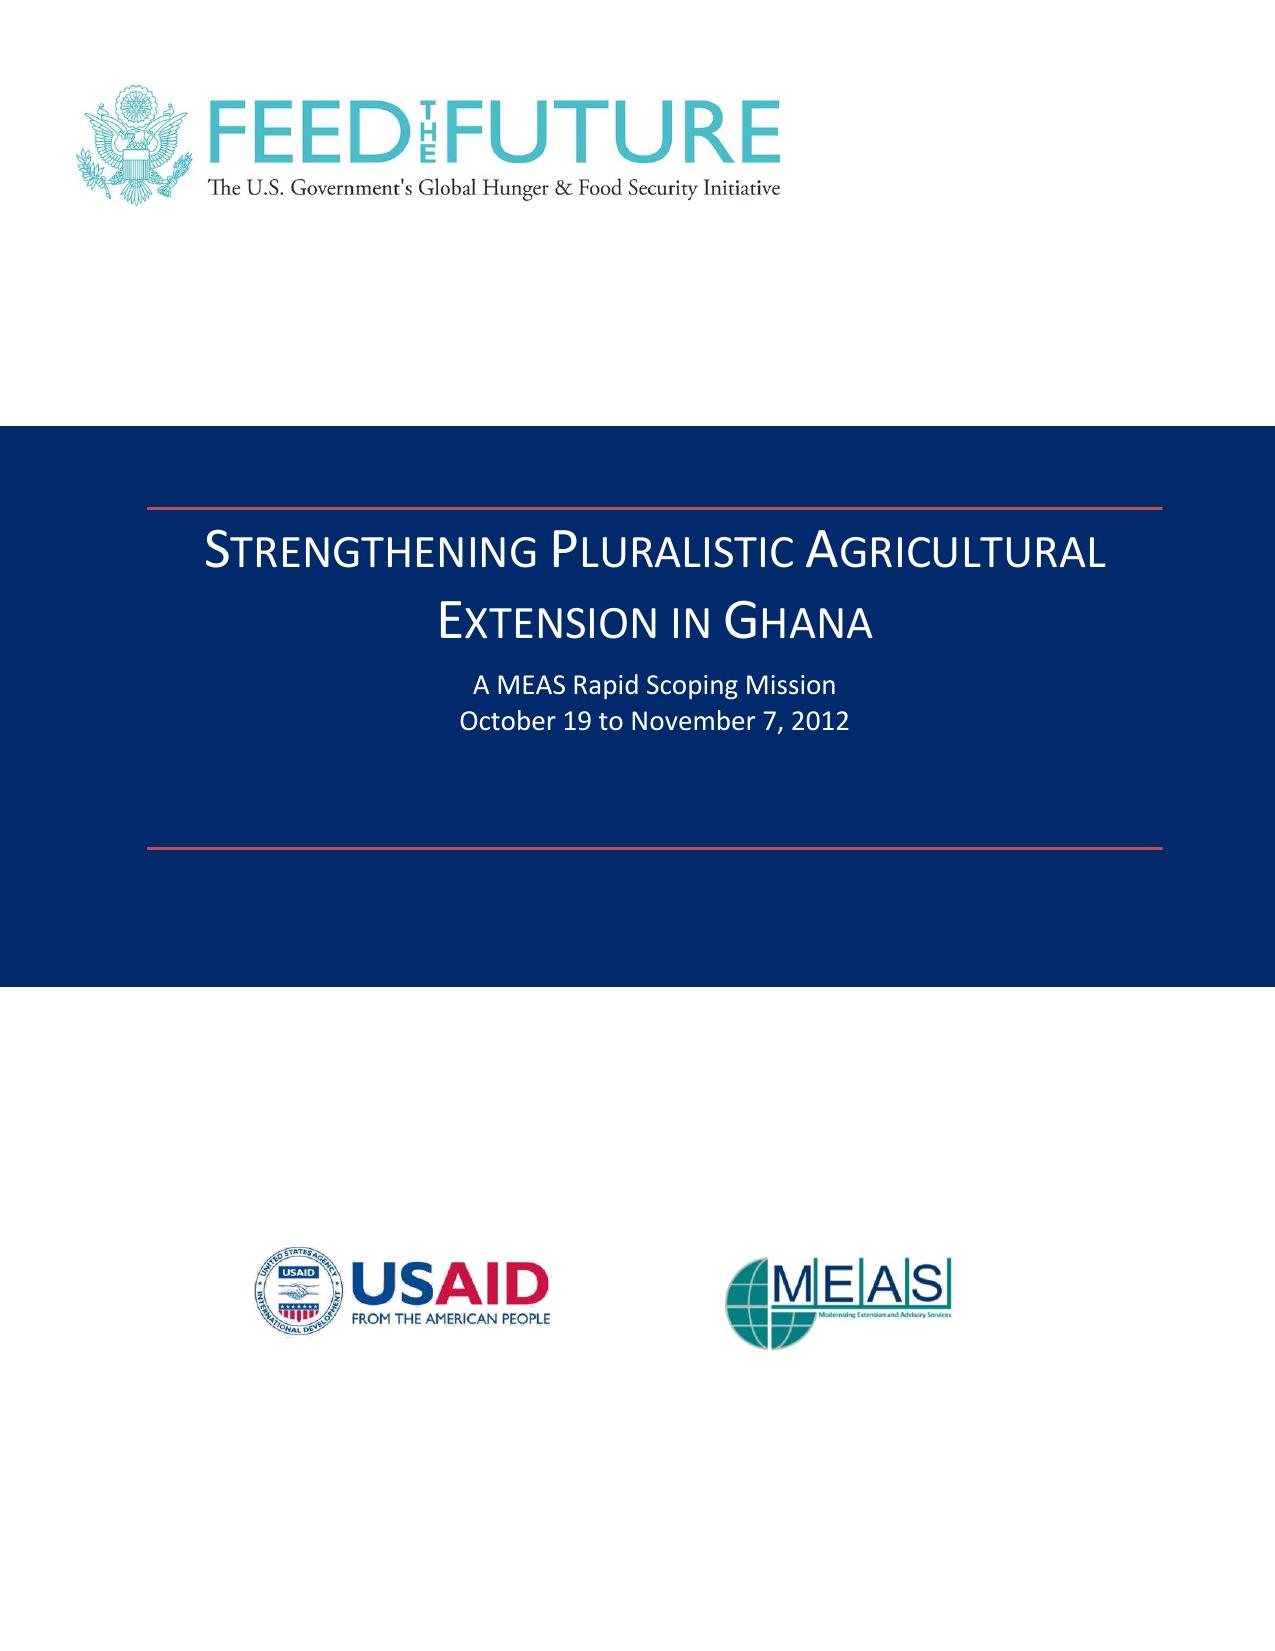 STRENGTHENING PLURALISTIC AGRICULTURAL EXTENSION IN GHANA 2012